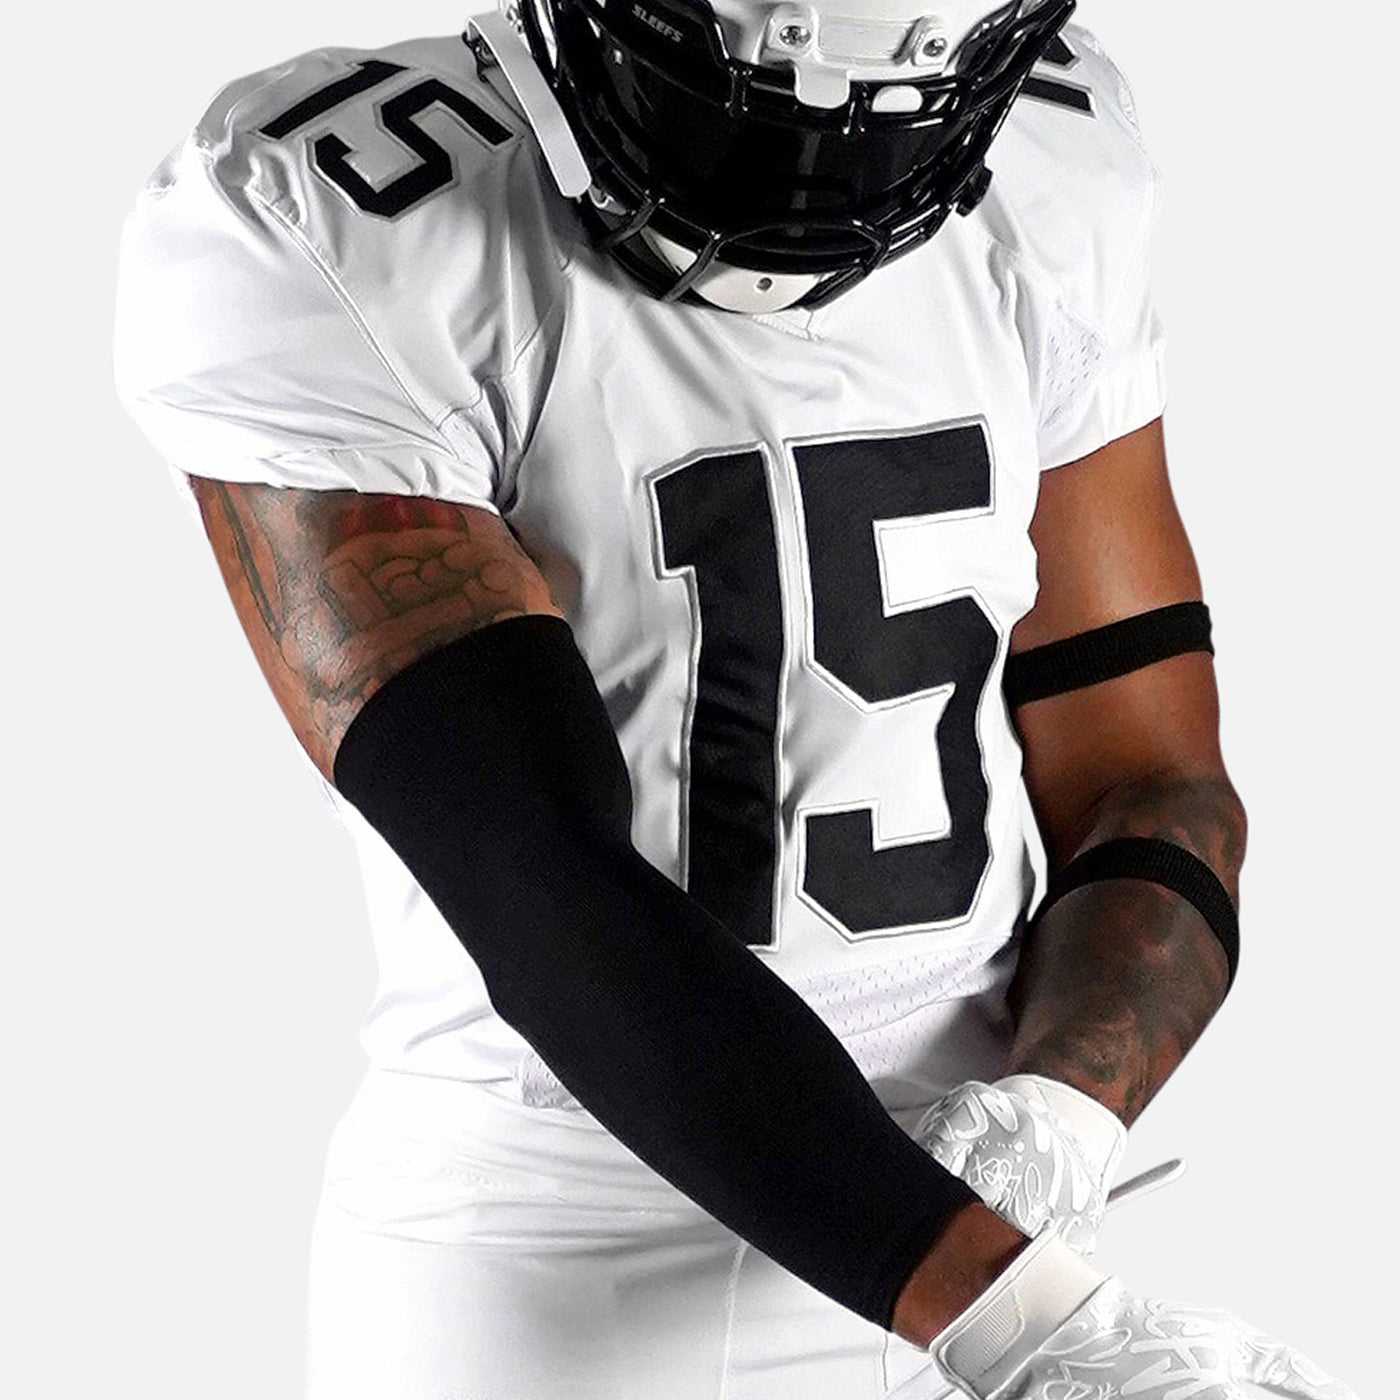 Basic Black One Size Fits All Arm Sleeve